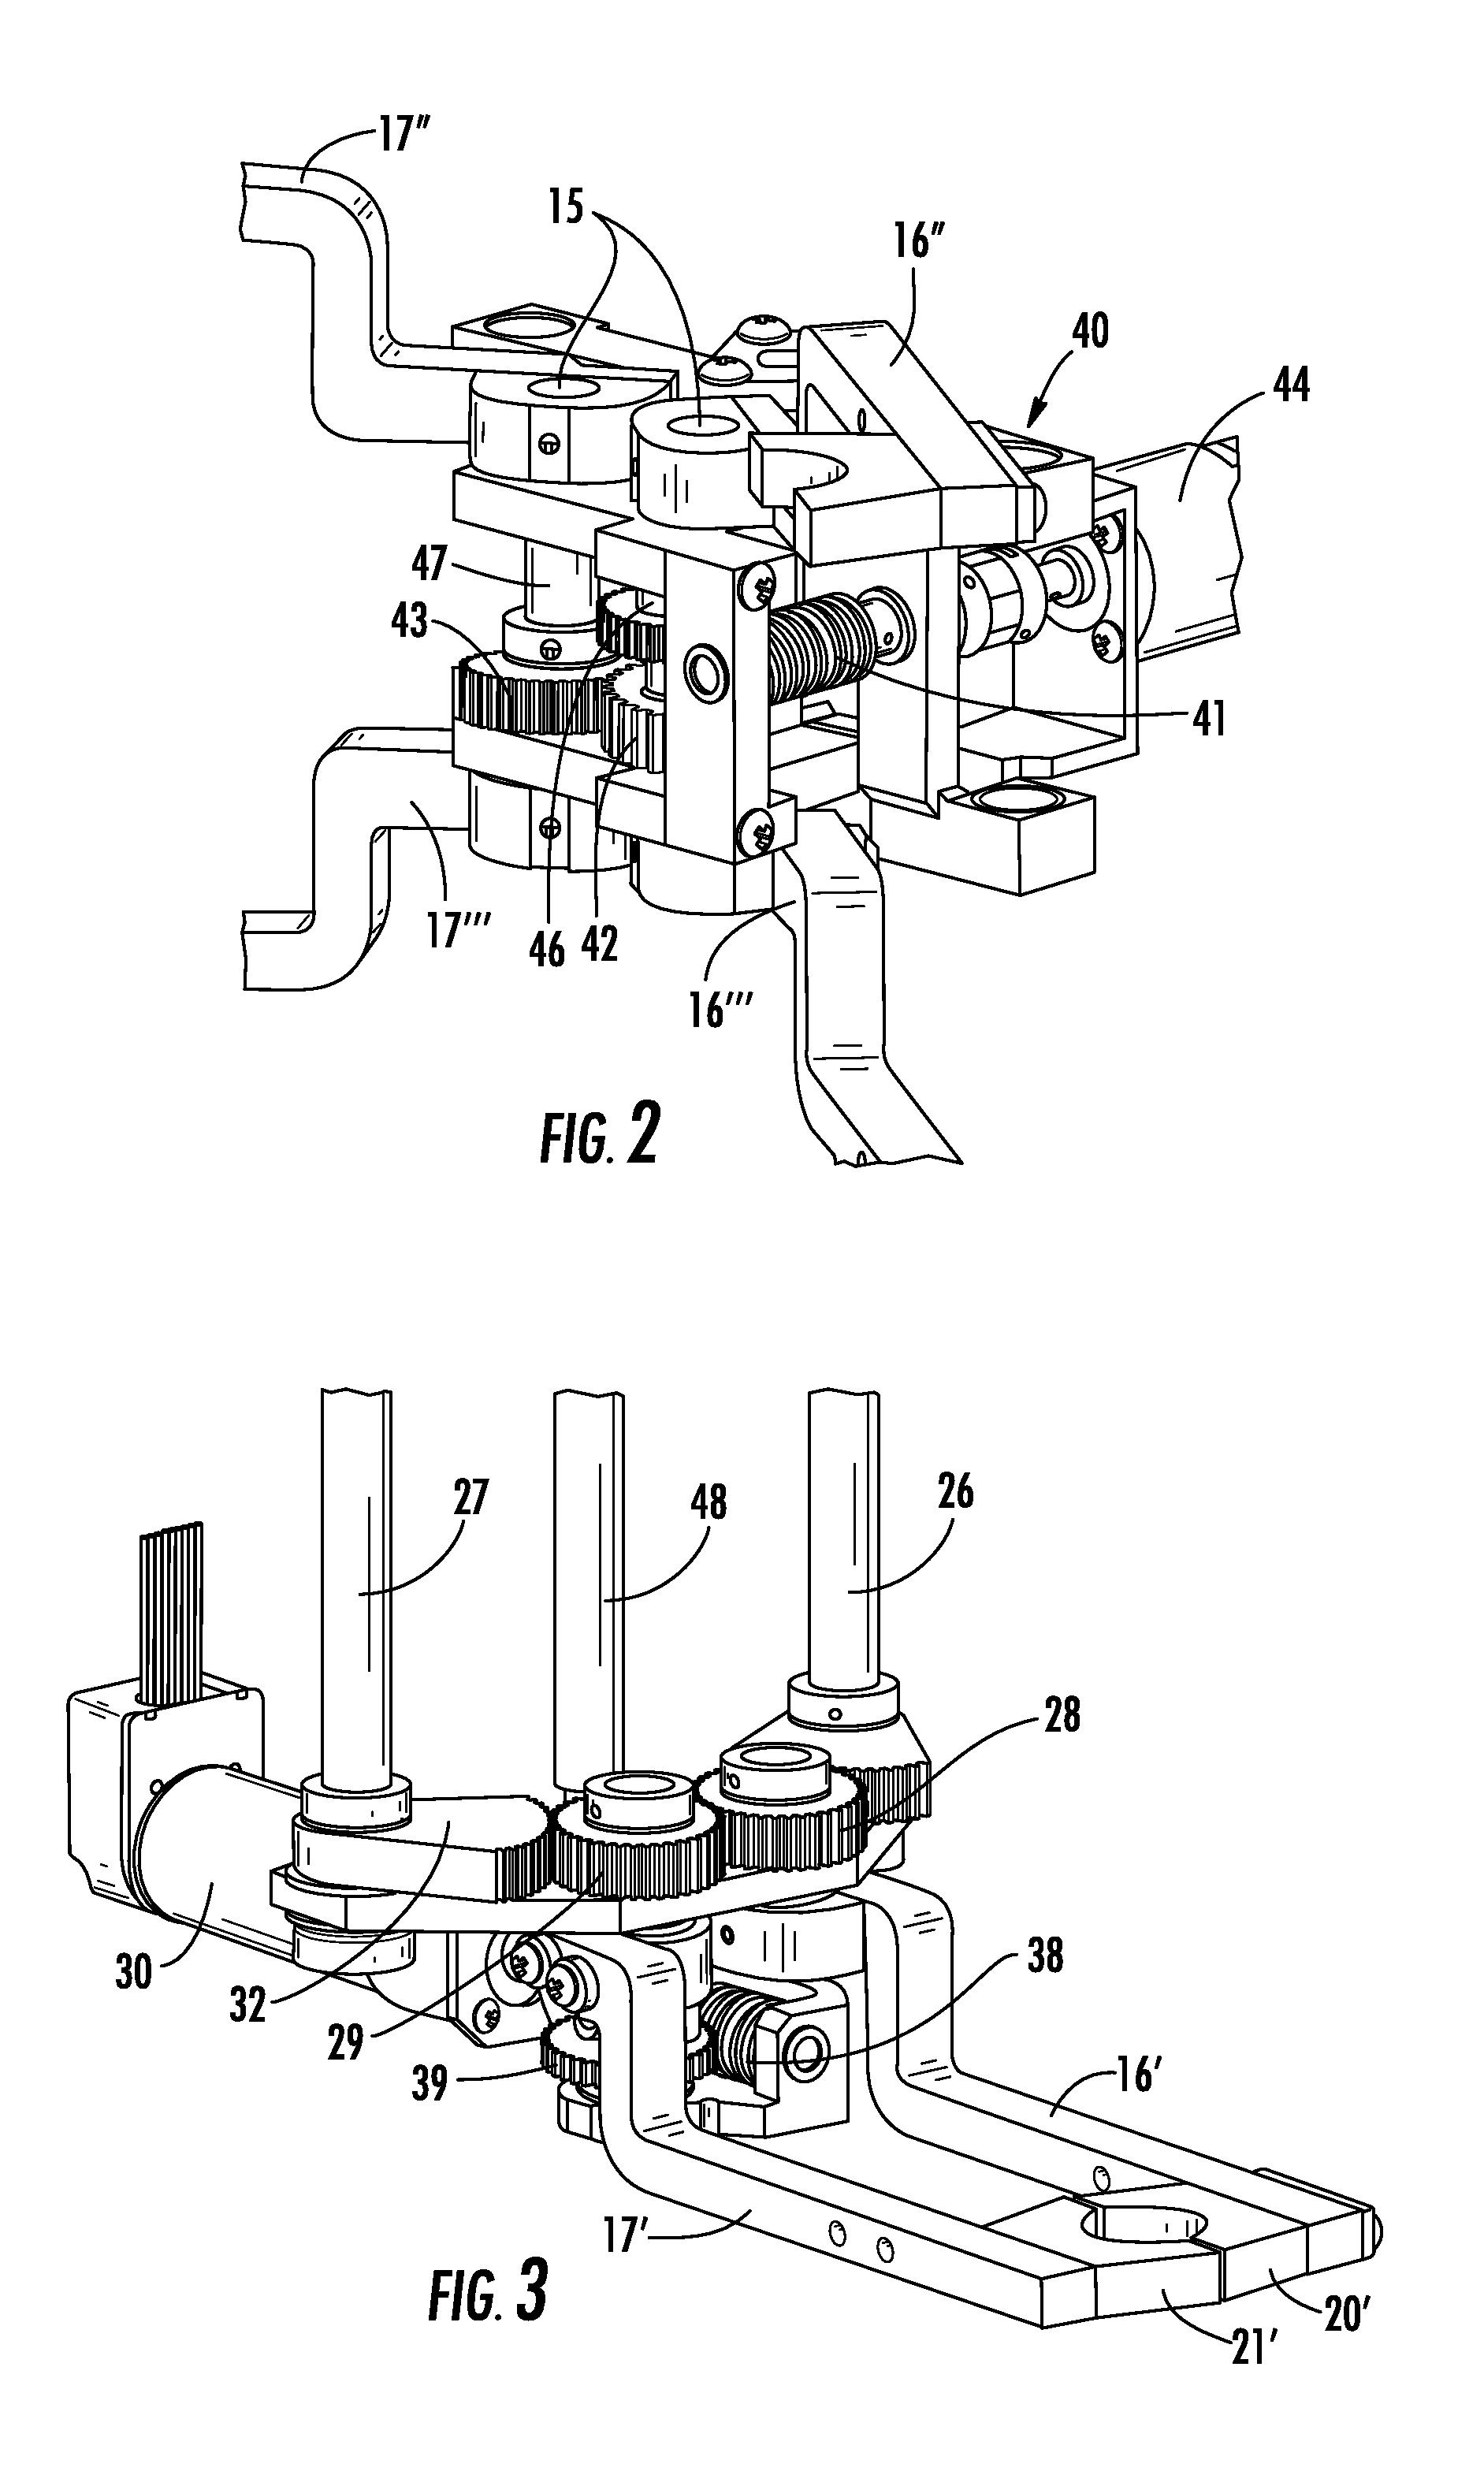 Apparatus and method for inspecting high voltage insulators